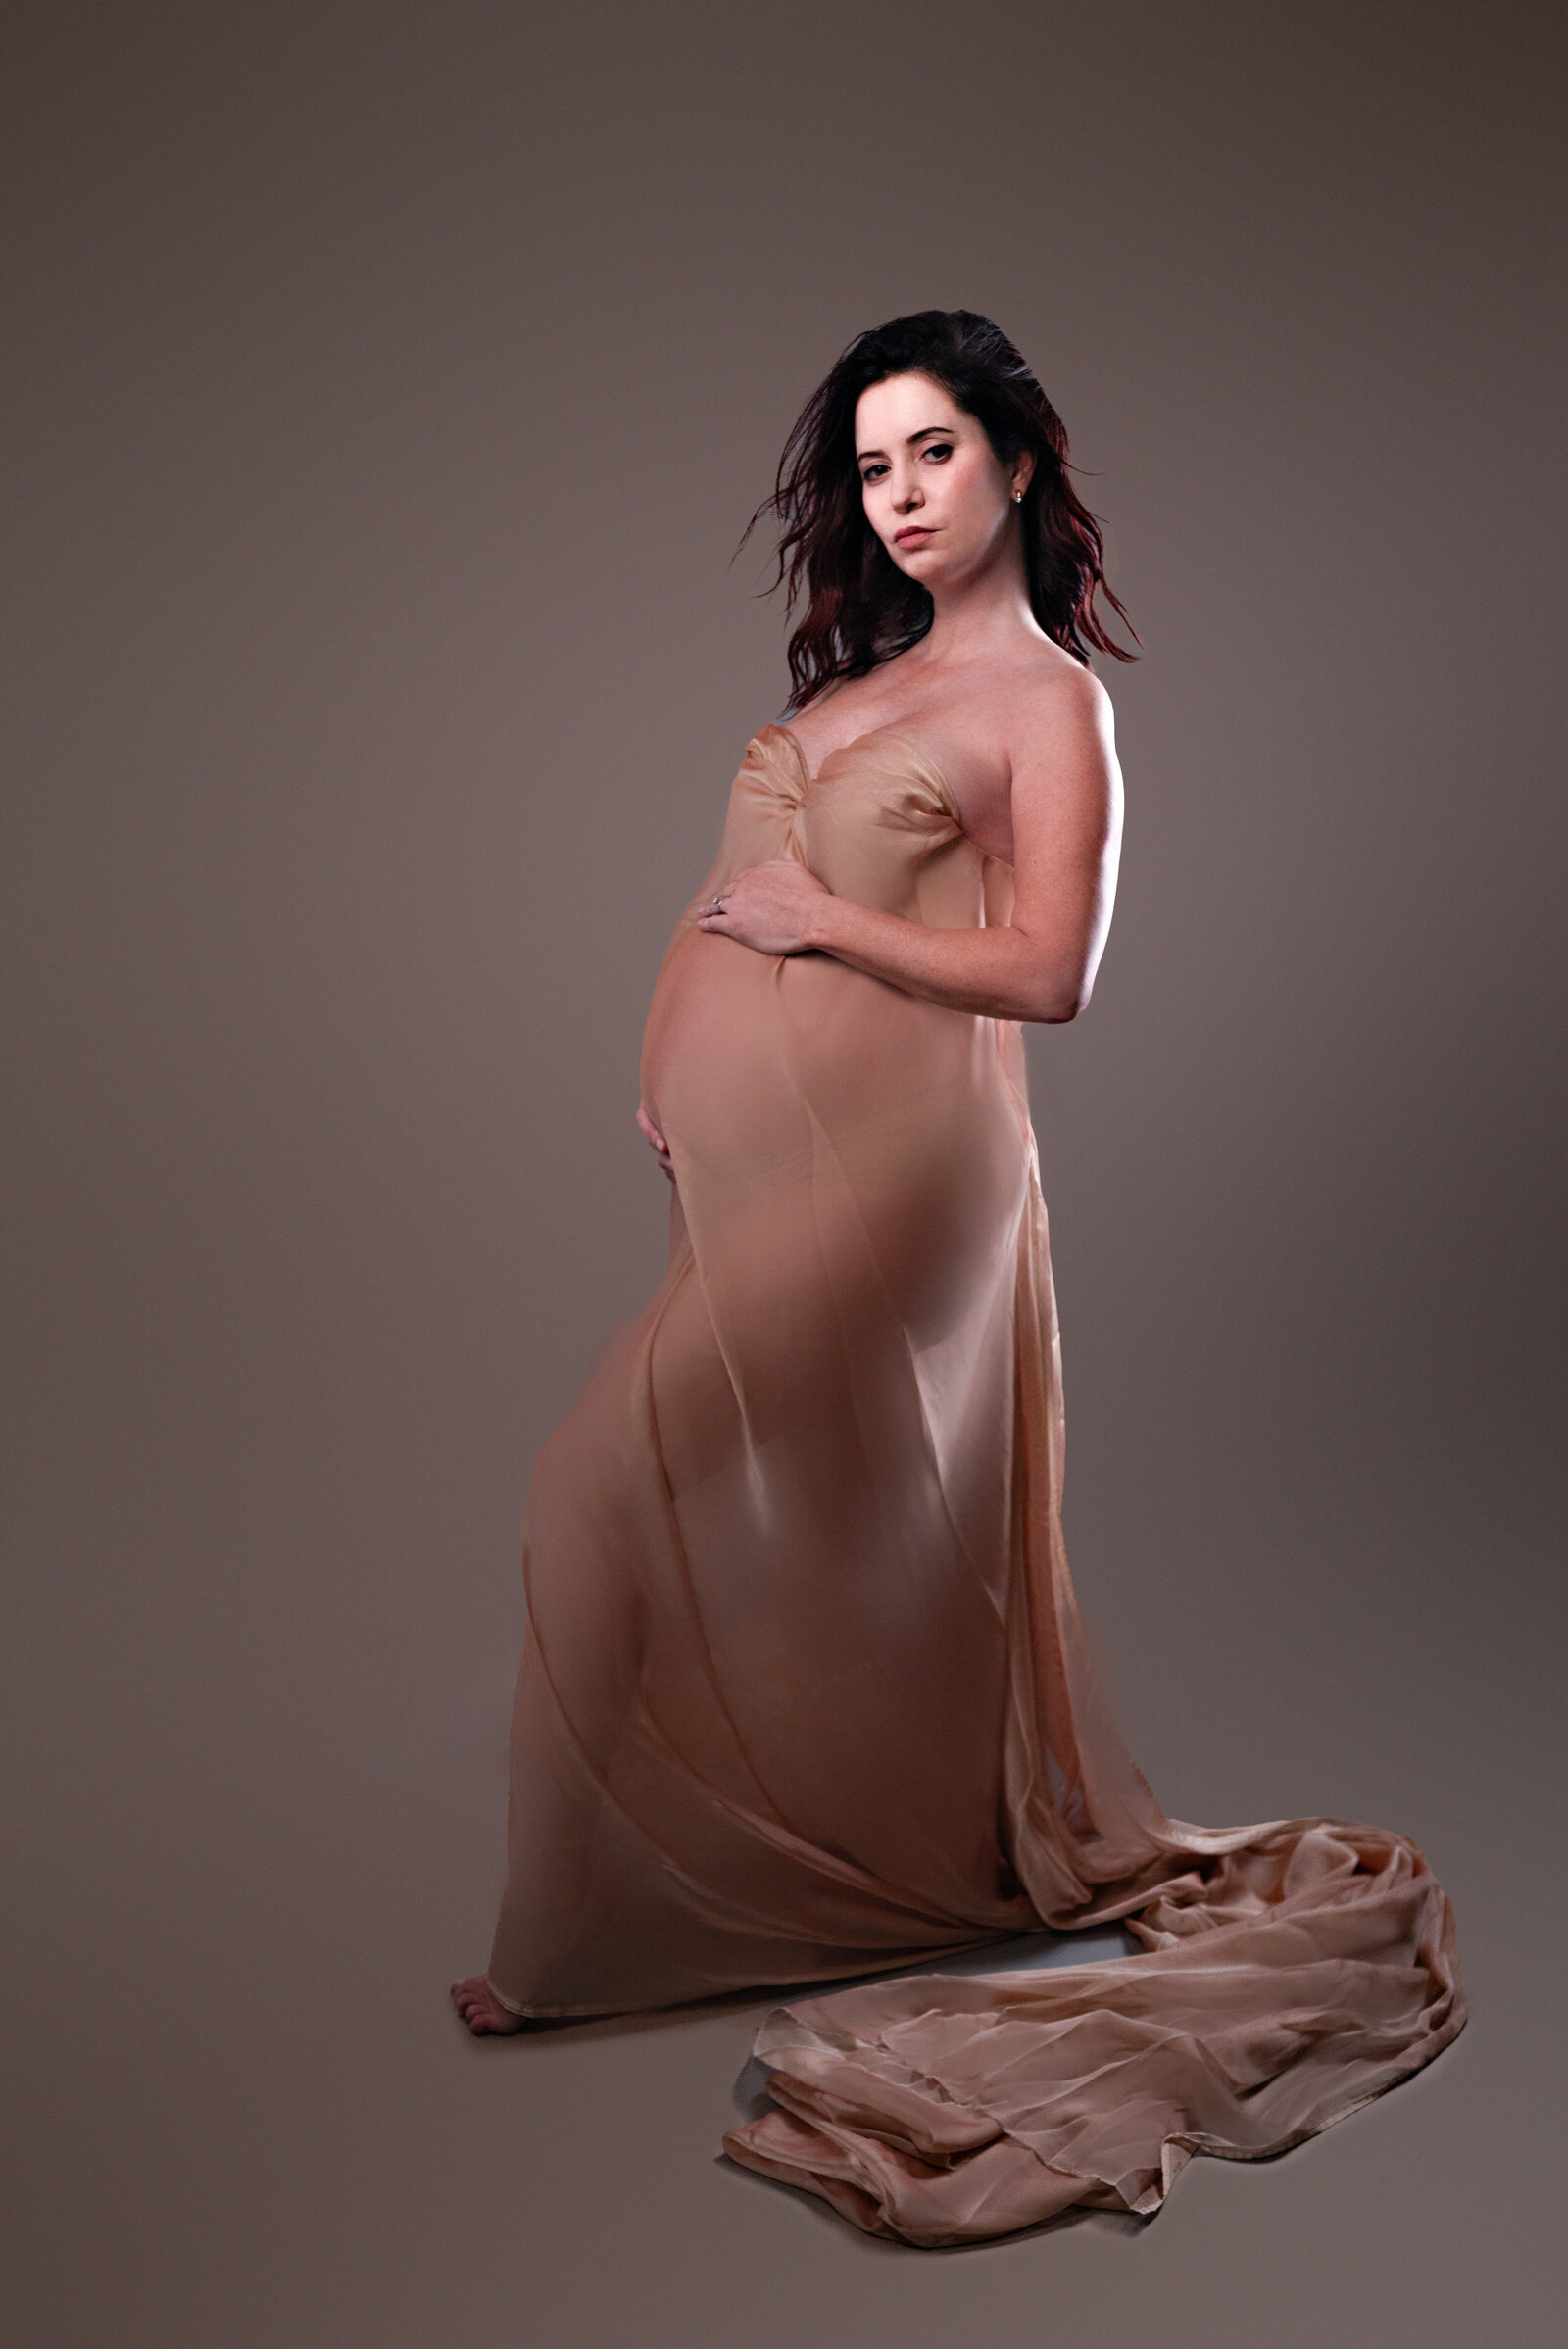 Pregnant woman wrapped in flowing fabric  and posing for the camera  in Huntsville Alabama